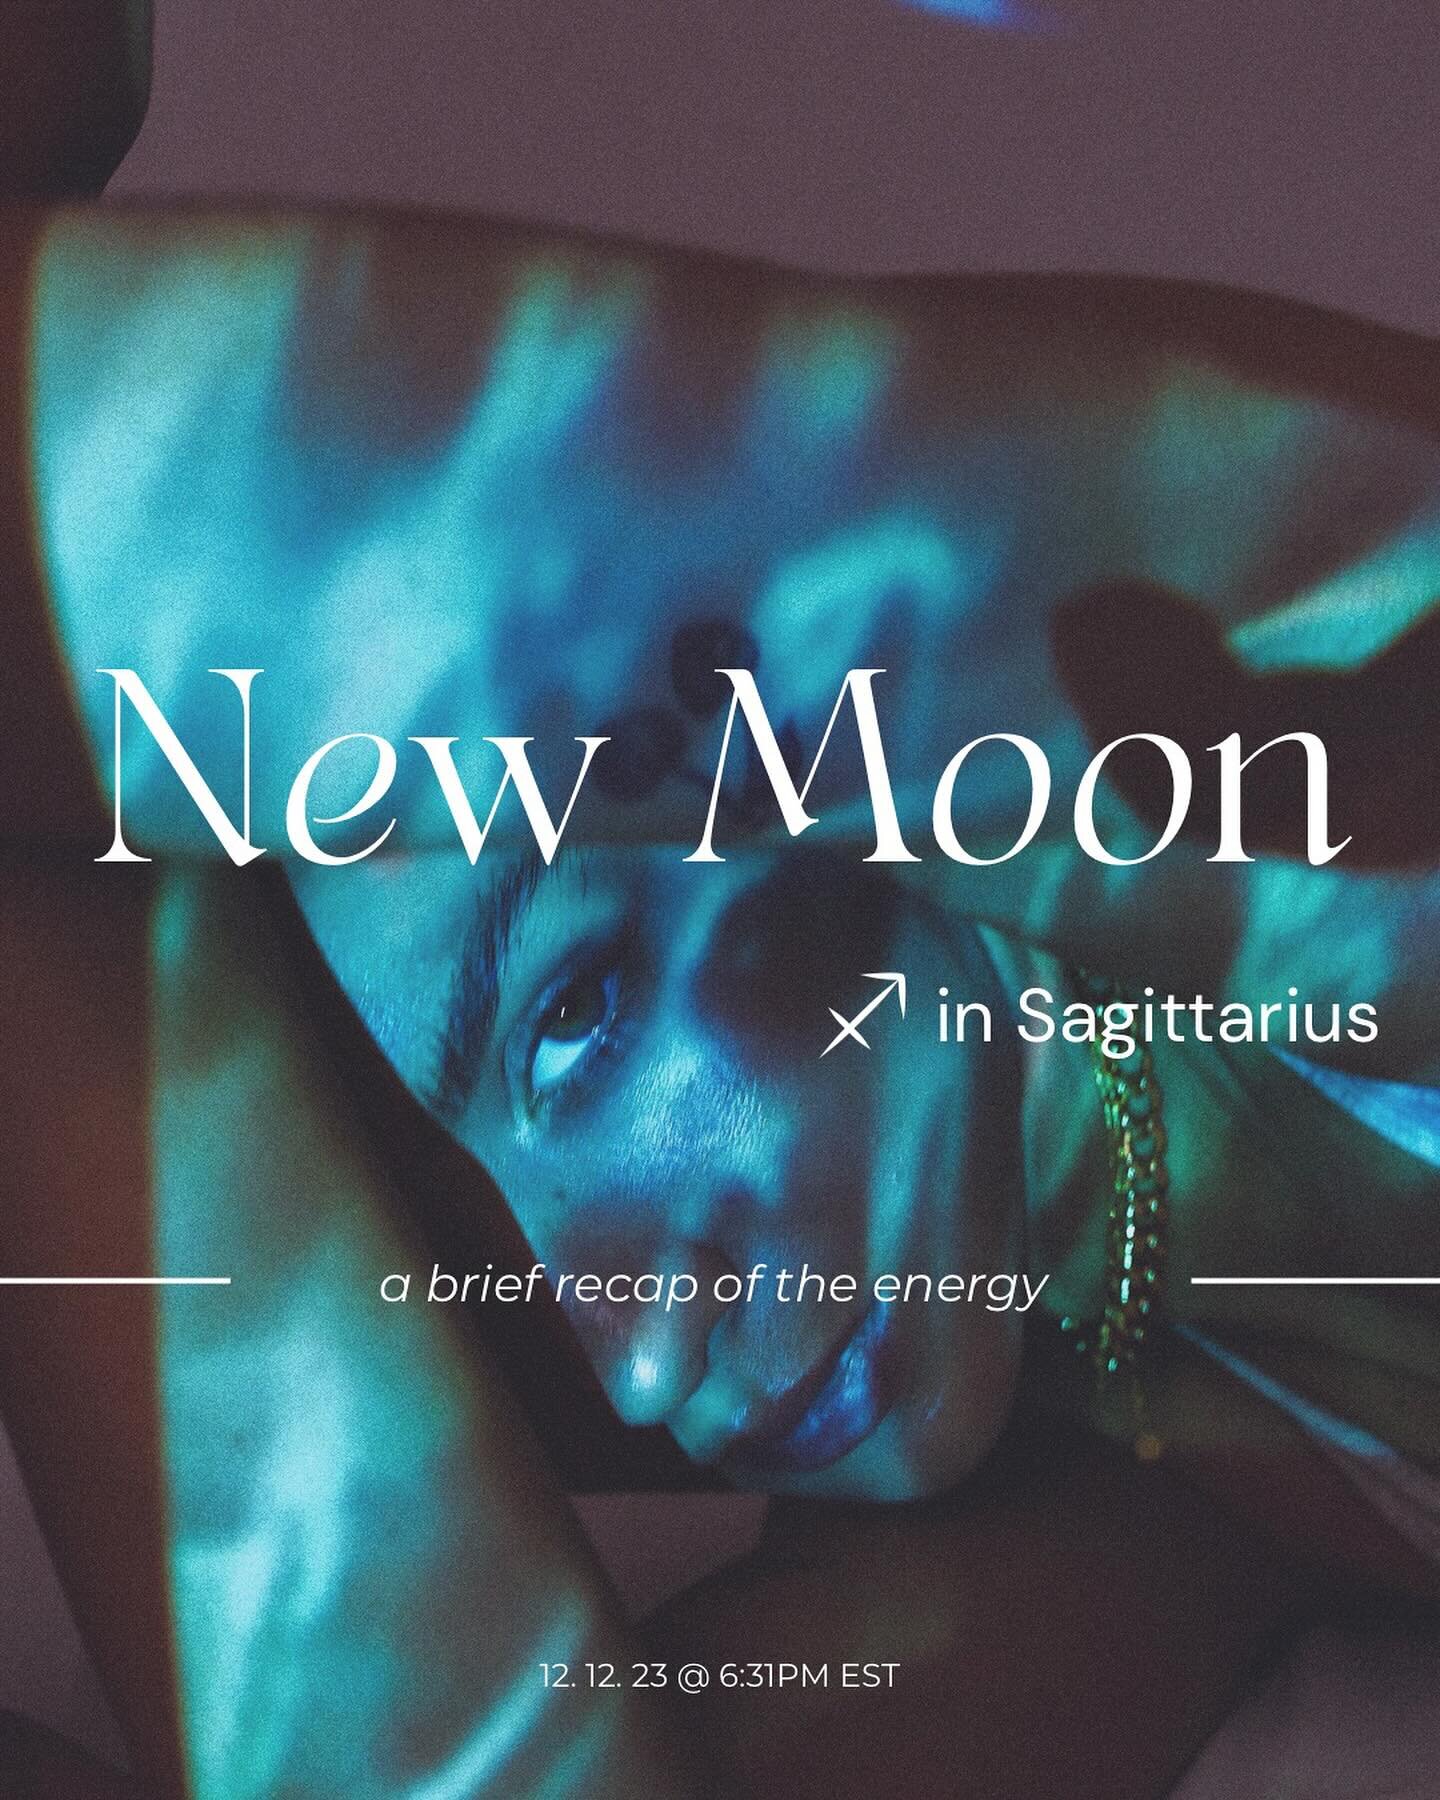 Happy New Moon in Sagittarius! ♐️ 

〰️ Today at 6:31 PM EST we have the New Moon in Sagittarius at 20&deg;. It&rsquo;s time to bet on yourself and trust that you have what you need to prosper. 

〰️ The more you are in your own energy during this cycl